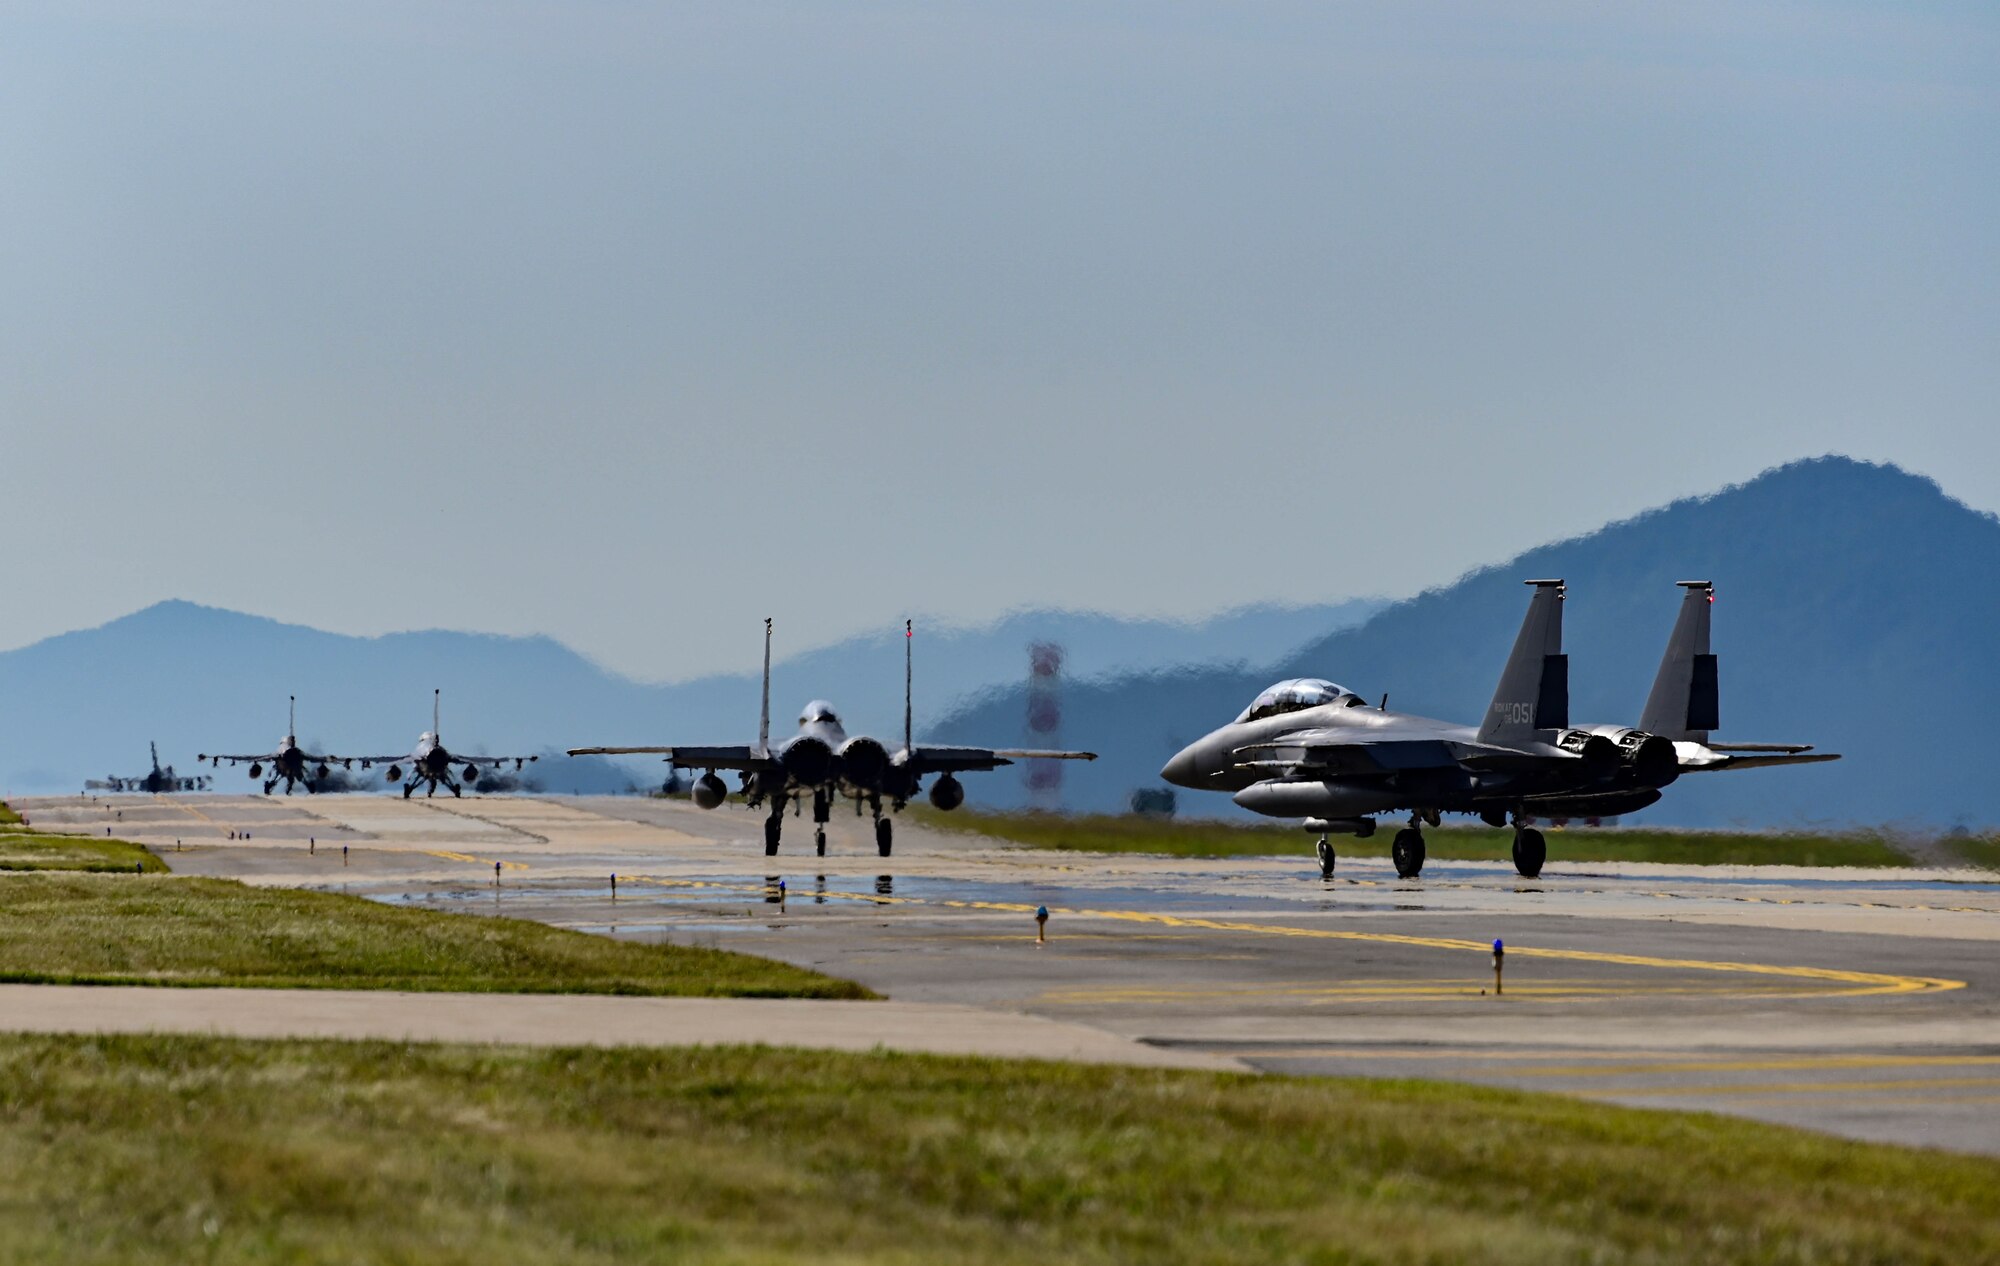 Republic of Korea Air Force F-15K Slam Eagles assigned to the 110th Fighter Squadron and U.S. Air Force F-16 Fighting Falcons assigned to the 8th Operations Group taxi on the runway during routine training at Kunsan Air Base, Republic of Korea, Sept. 22, 2022. Bilateral training events fulfill a vital role in fortifying the partnership between ROKAF and U.S. counterparts while also playing an integral part in the safety and security of the Indo-Pacific region. (U.S. Air Force Photo by Senior Airman Shannon Braaten)